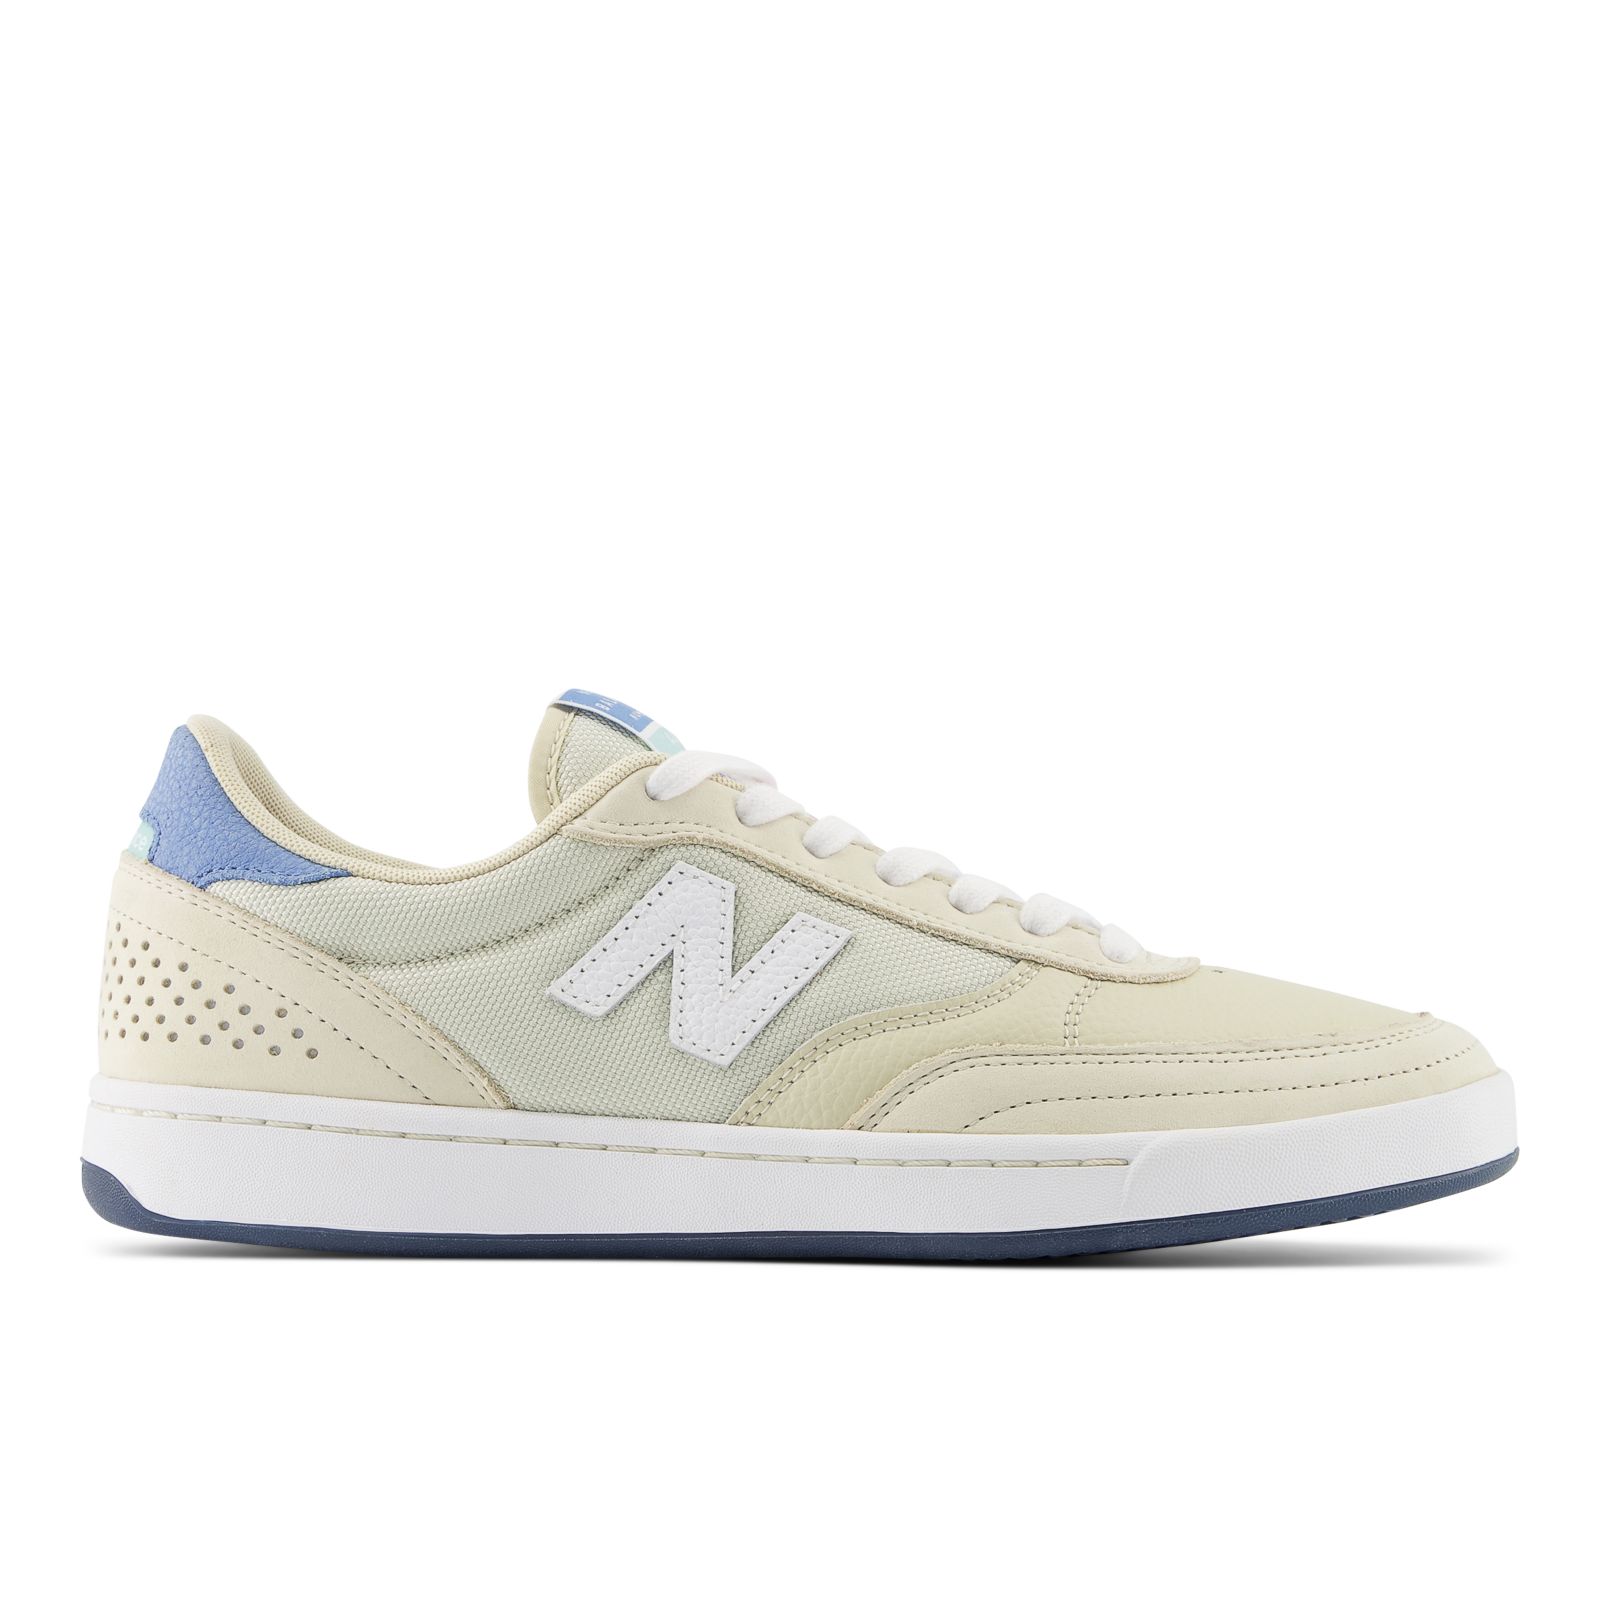 In detail Walging premie NB Numeric 440 - New Balance